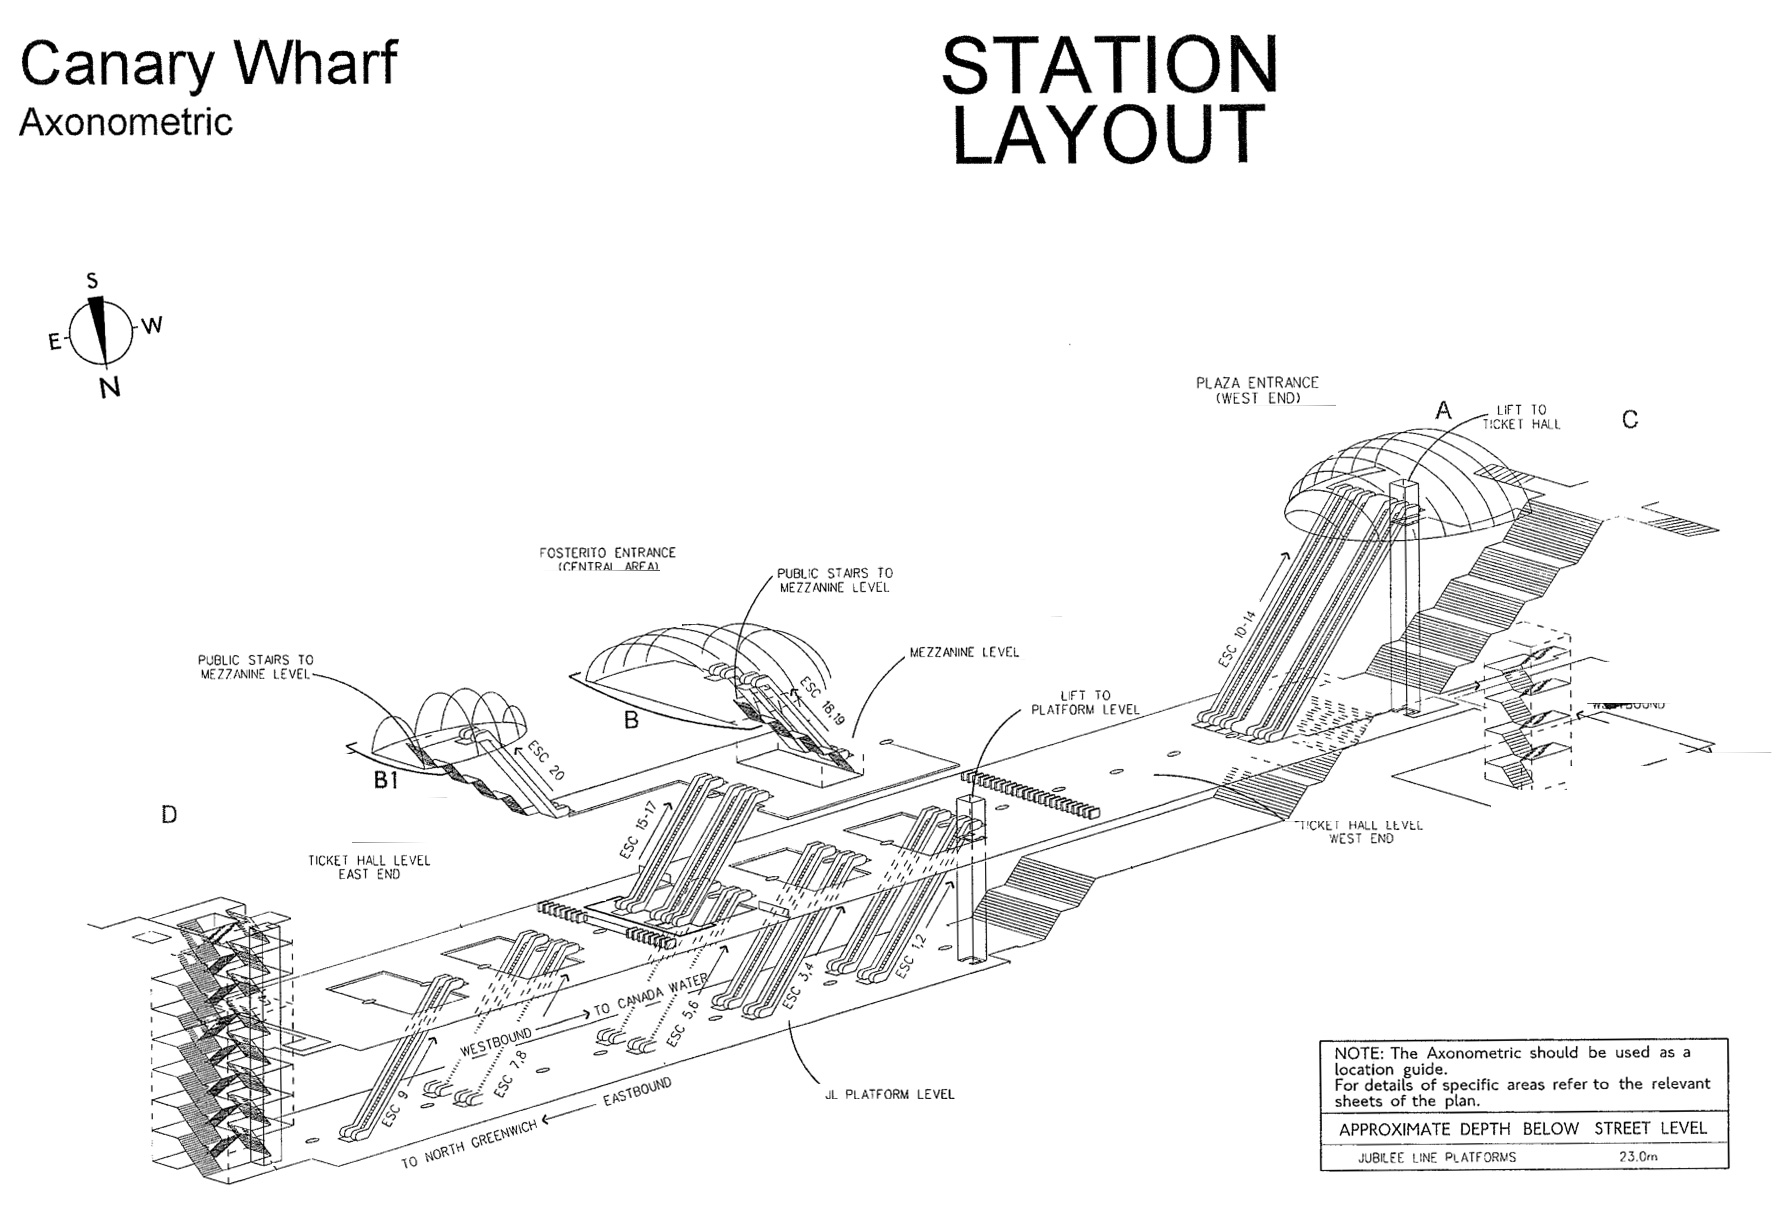 diagramme-3d-station-metro-londres-canary-wharf-03